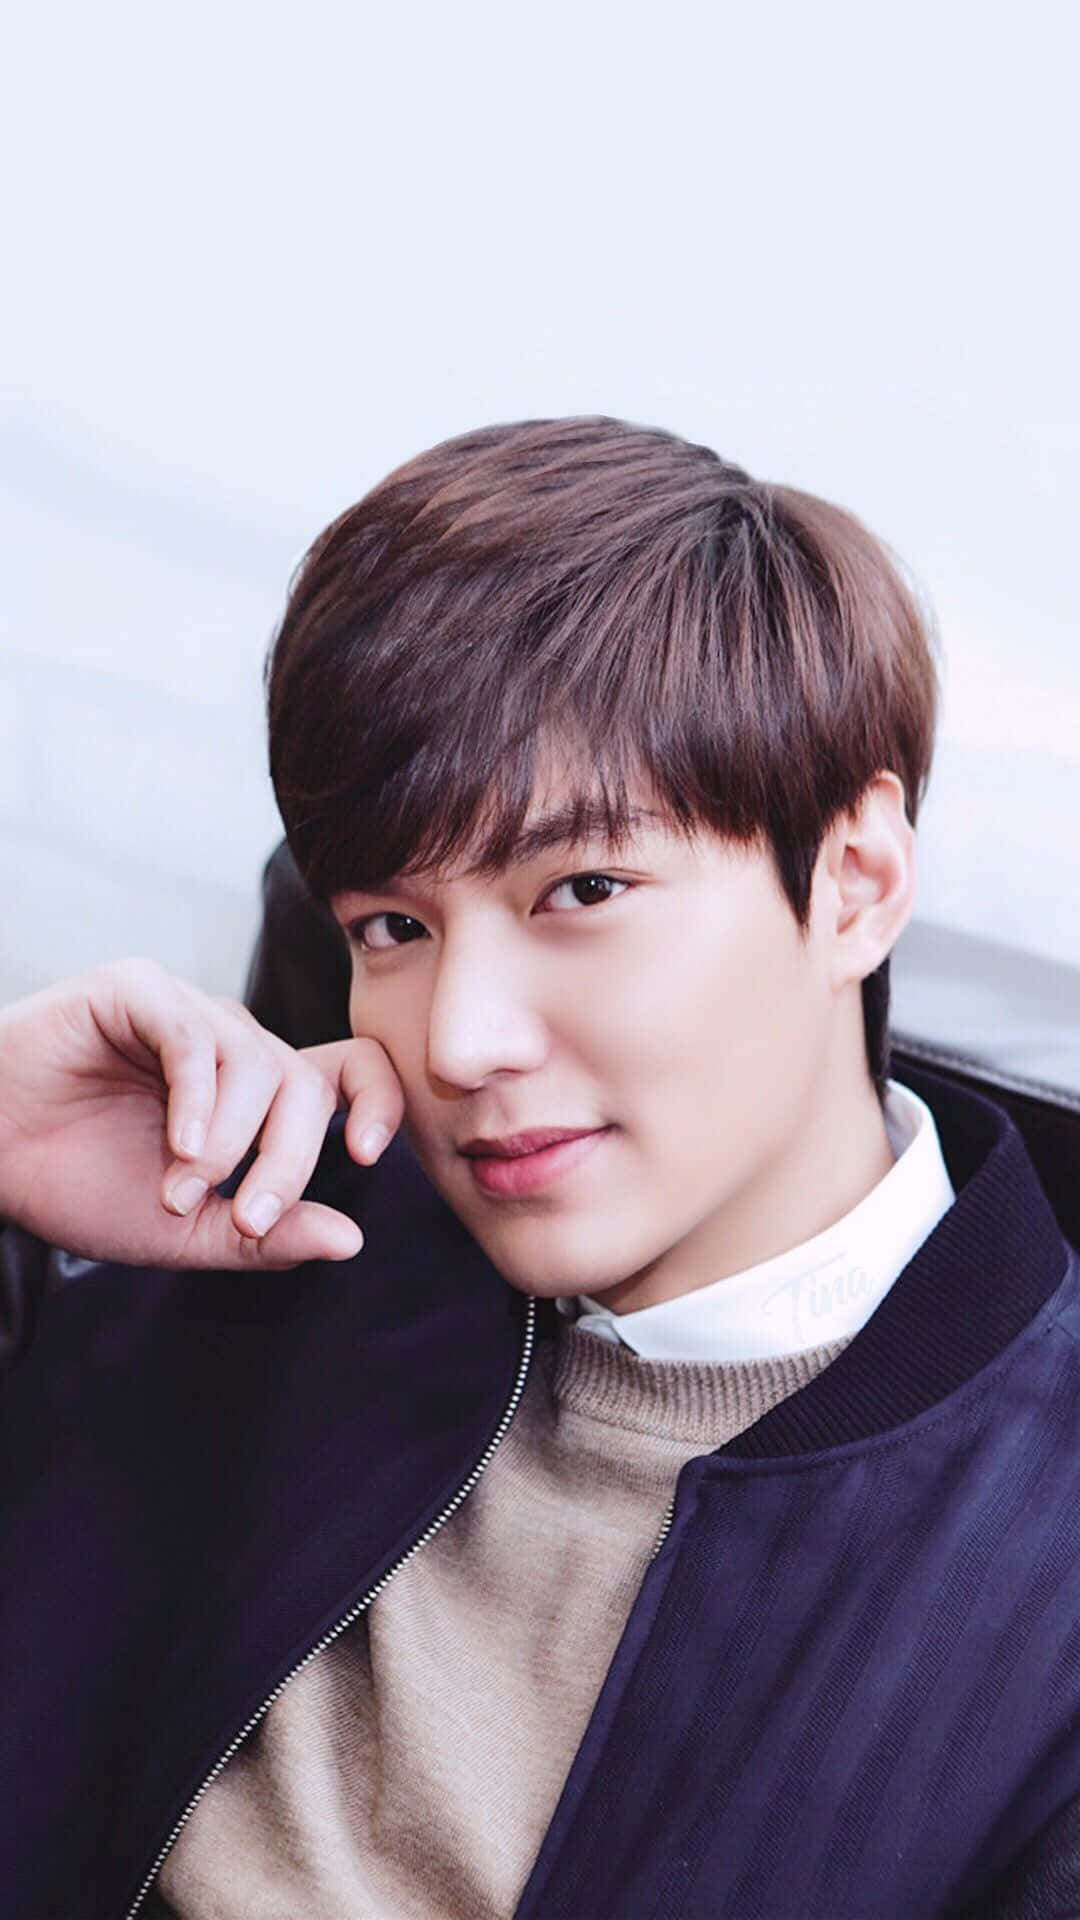 South Korean Star Lee Min Ho Majestically Posing For A Photoshoot Background